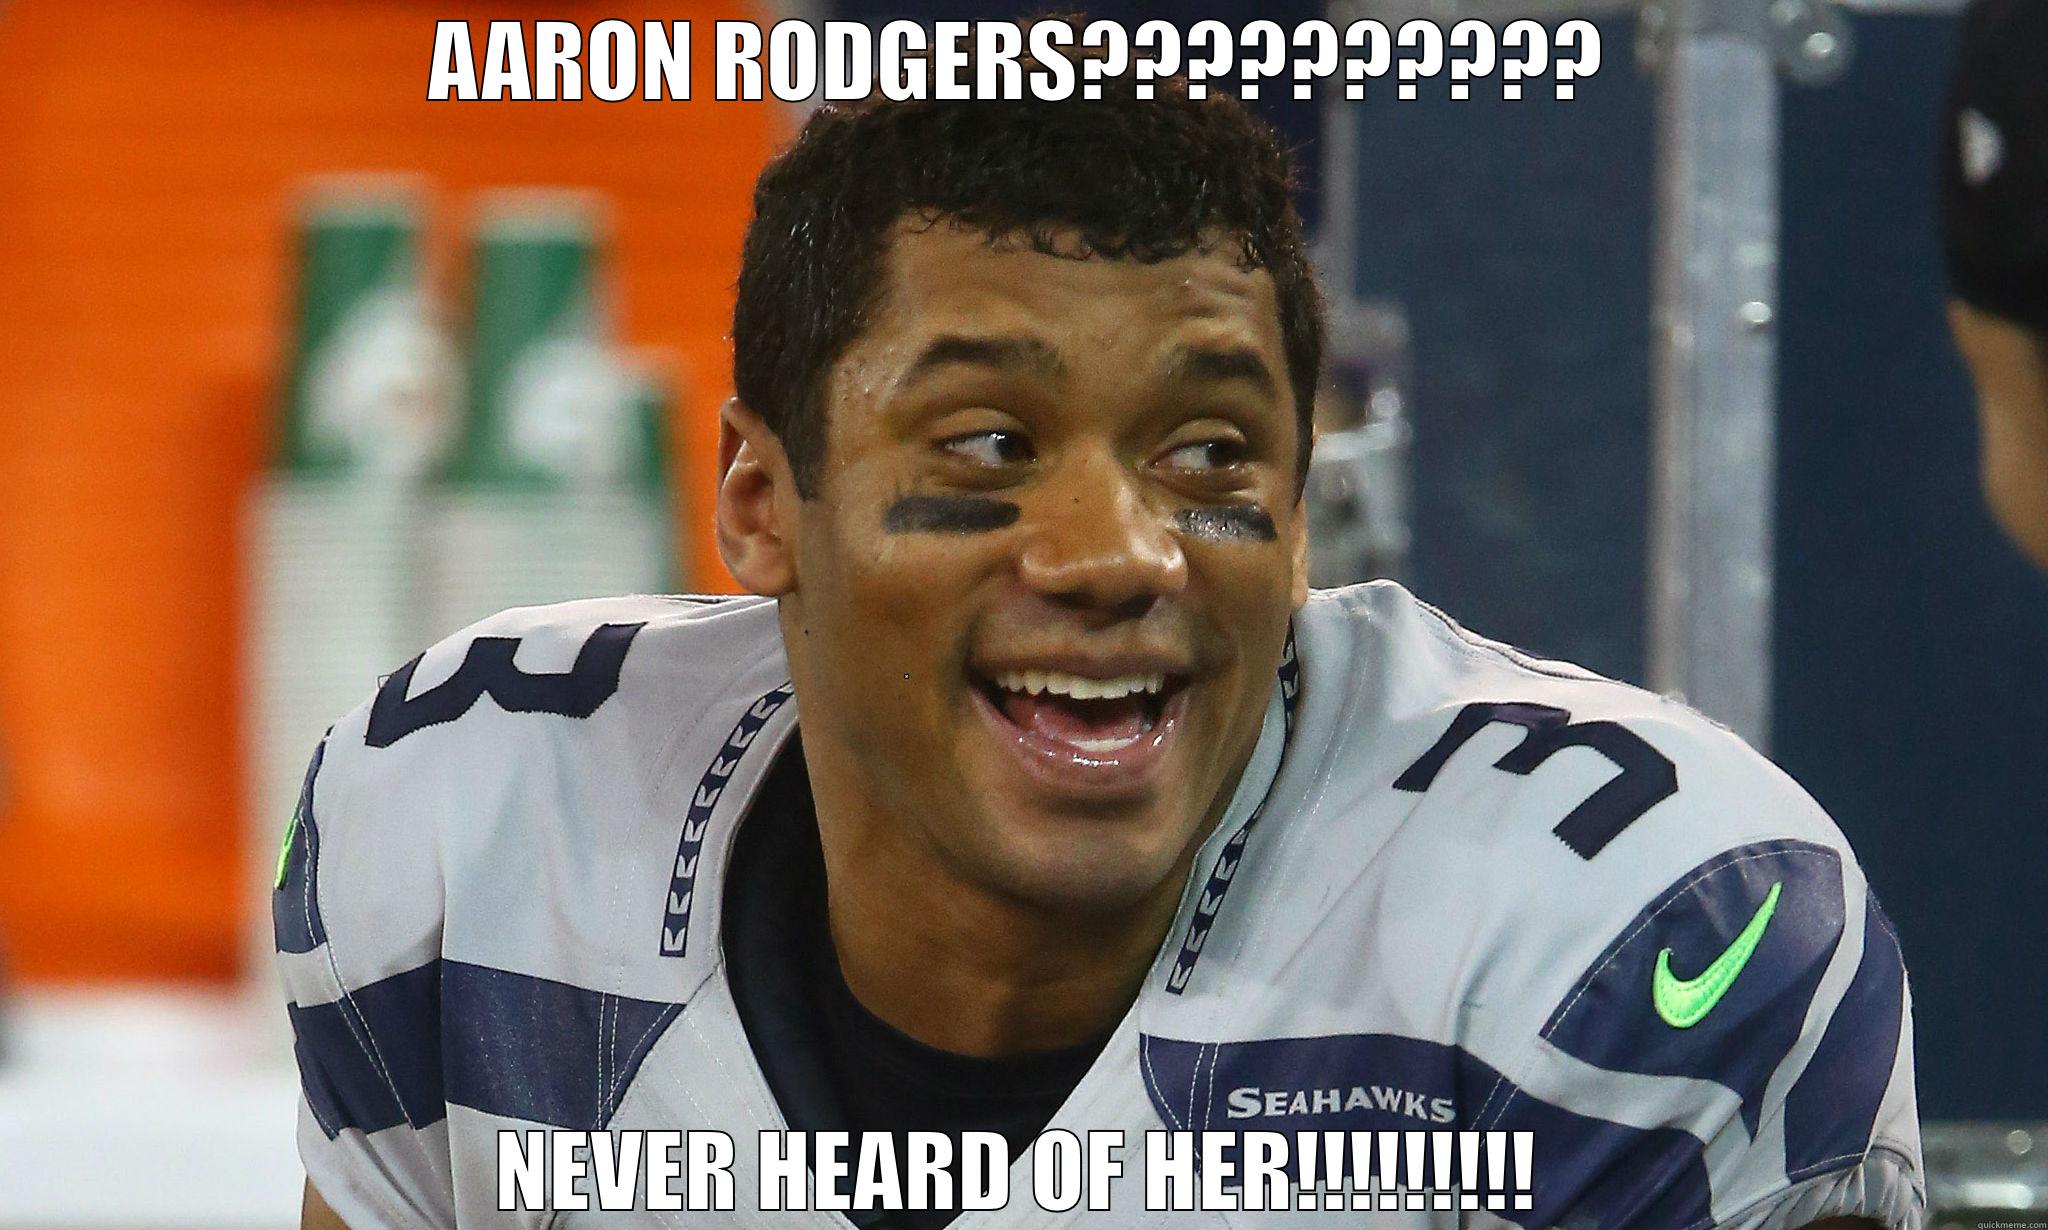 gb losers lol - AARON RODGERS?????????? NEVER HEARD OF HER!!!!!!!!! Misc